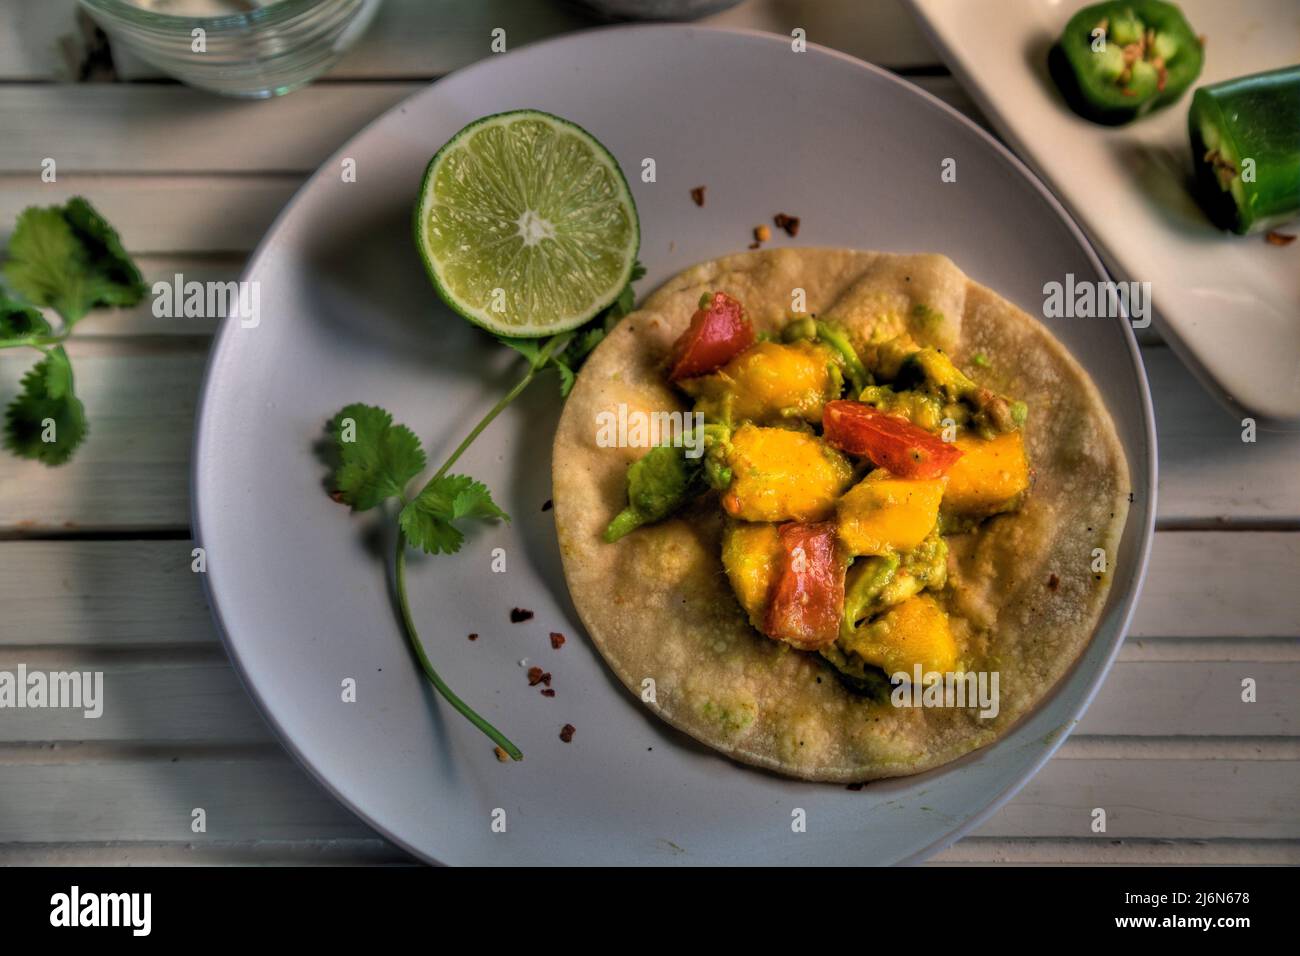 Top view of tacos with mango, avocado, jalapeno, tomato and red onion. Stock Photo